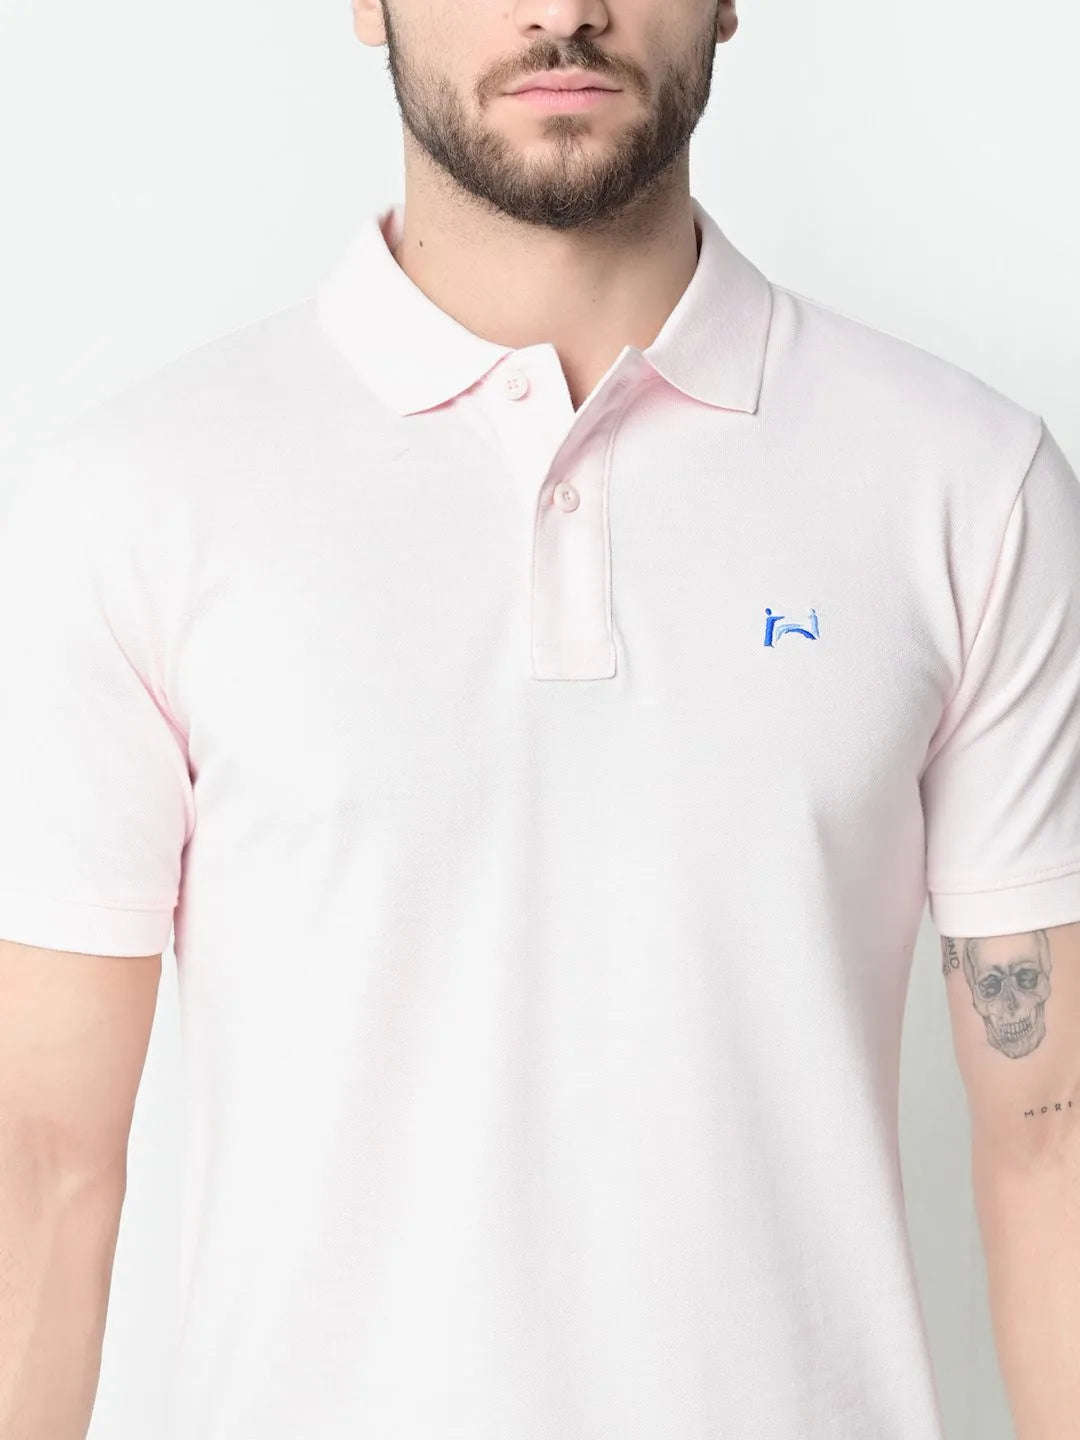 Flawless Men Organic Aesthetic Pink Polo T-Shirt Being Flawless